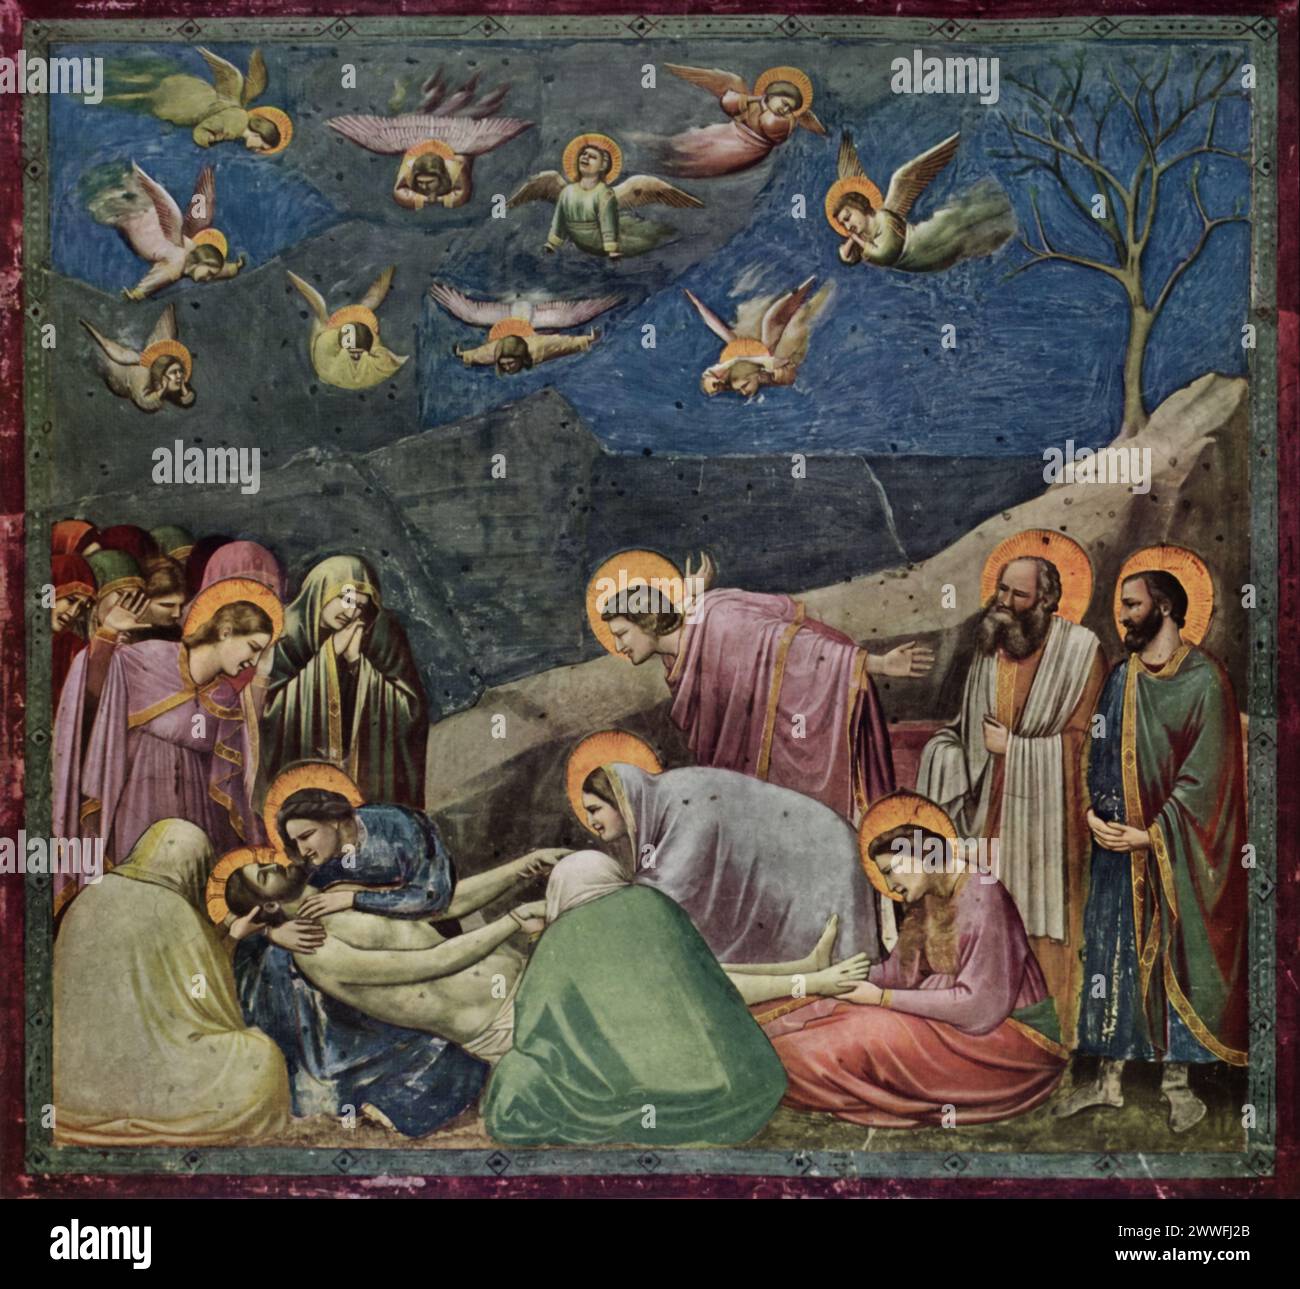 Giotto's 'The Deposition' (early 14th century): Found in the Scrovegni Chapel, Padua, this fresco captures the poignant moment of Christ's lamentation after being taken down from the cross. Renowned for its emotional depth and realistic depiction of grief, Giotto's work marks a significant shift towards humanism in art. The composition, with its focus on human emotion and the innovative use of space, plays a pivotal role in the transition to Renaissance artistry. Stock Photo